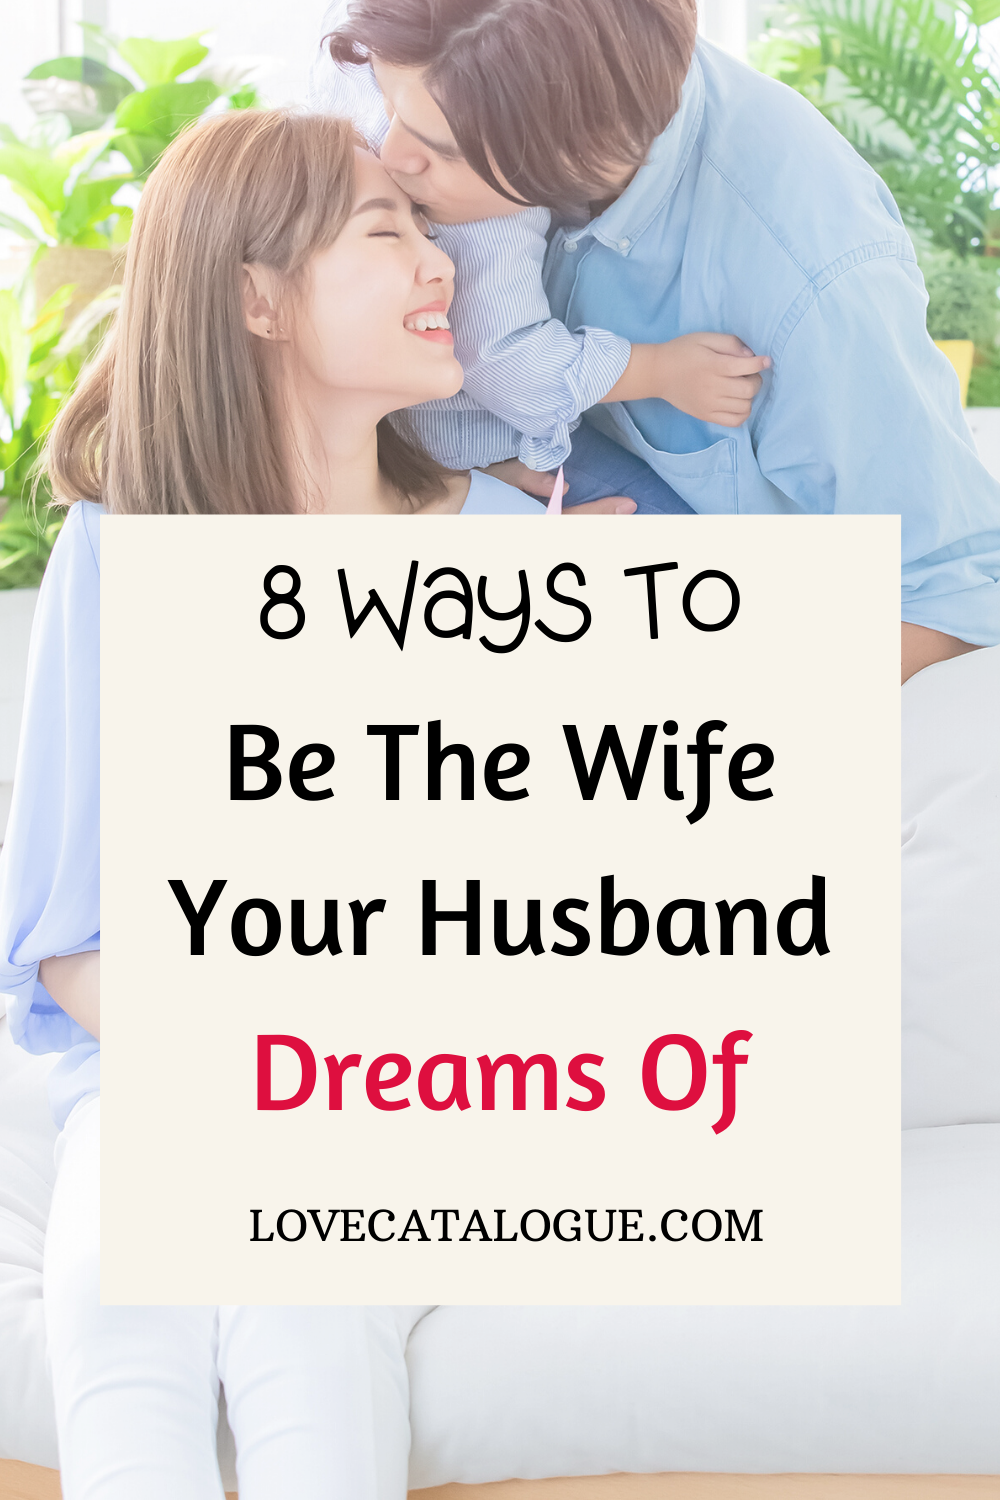 8 Ways To Be The Wife Your Husband Dreams Of